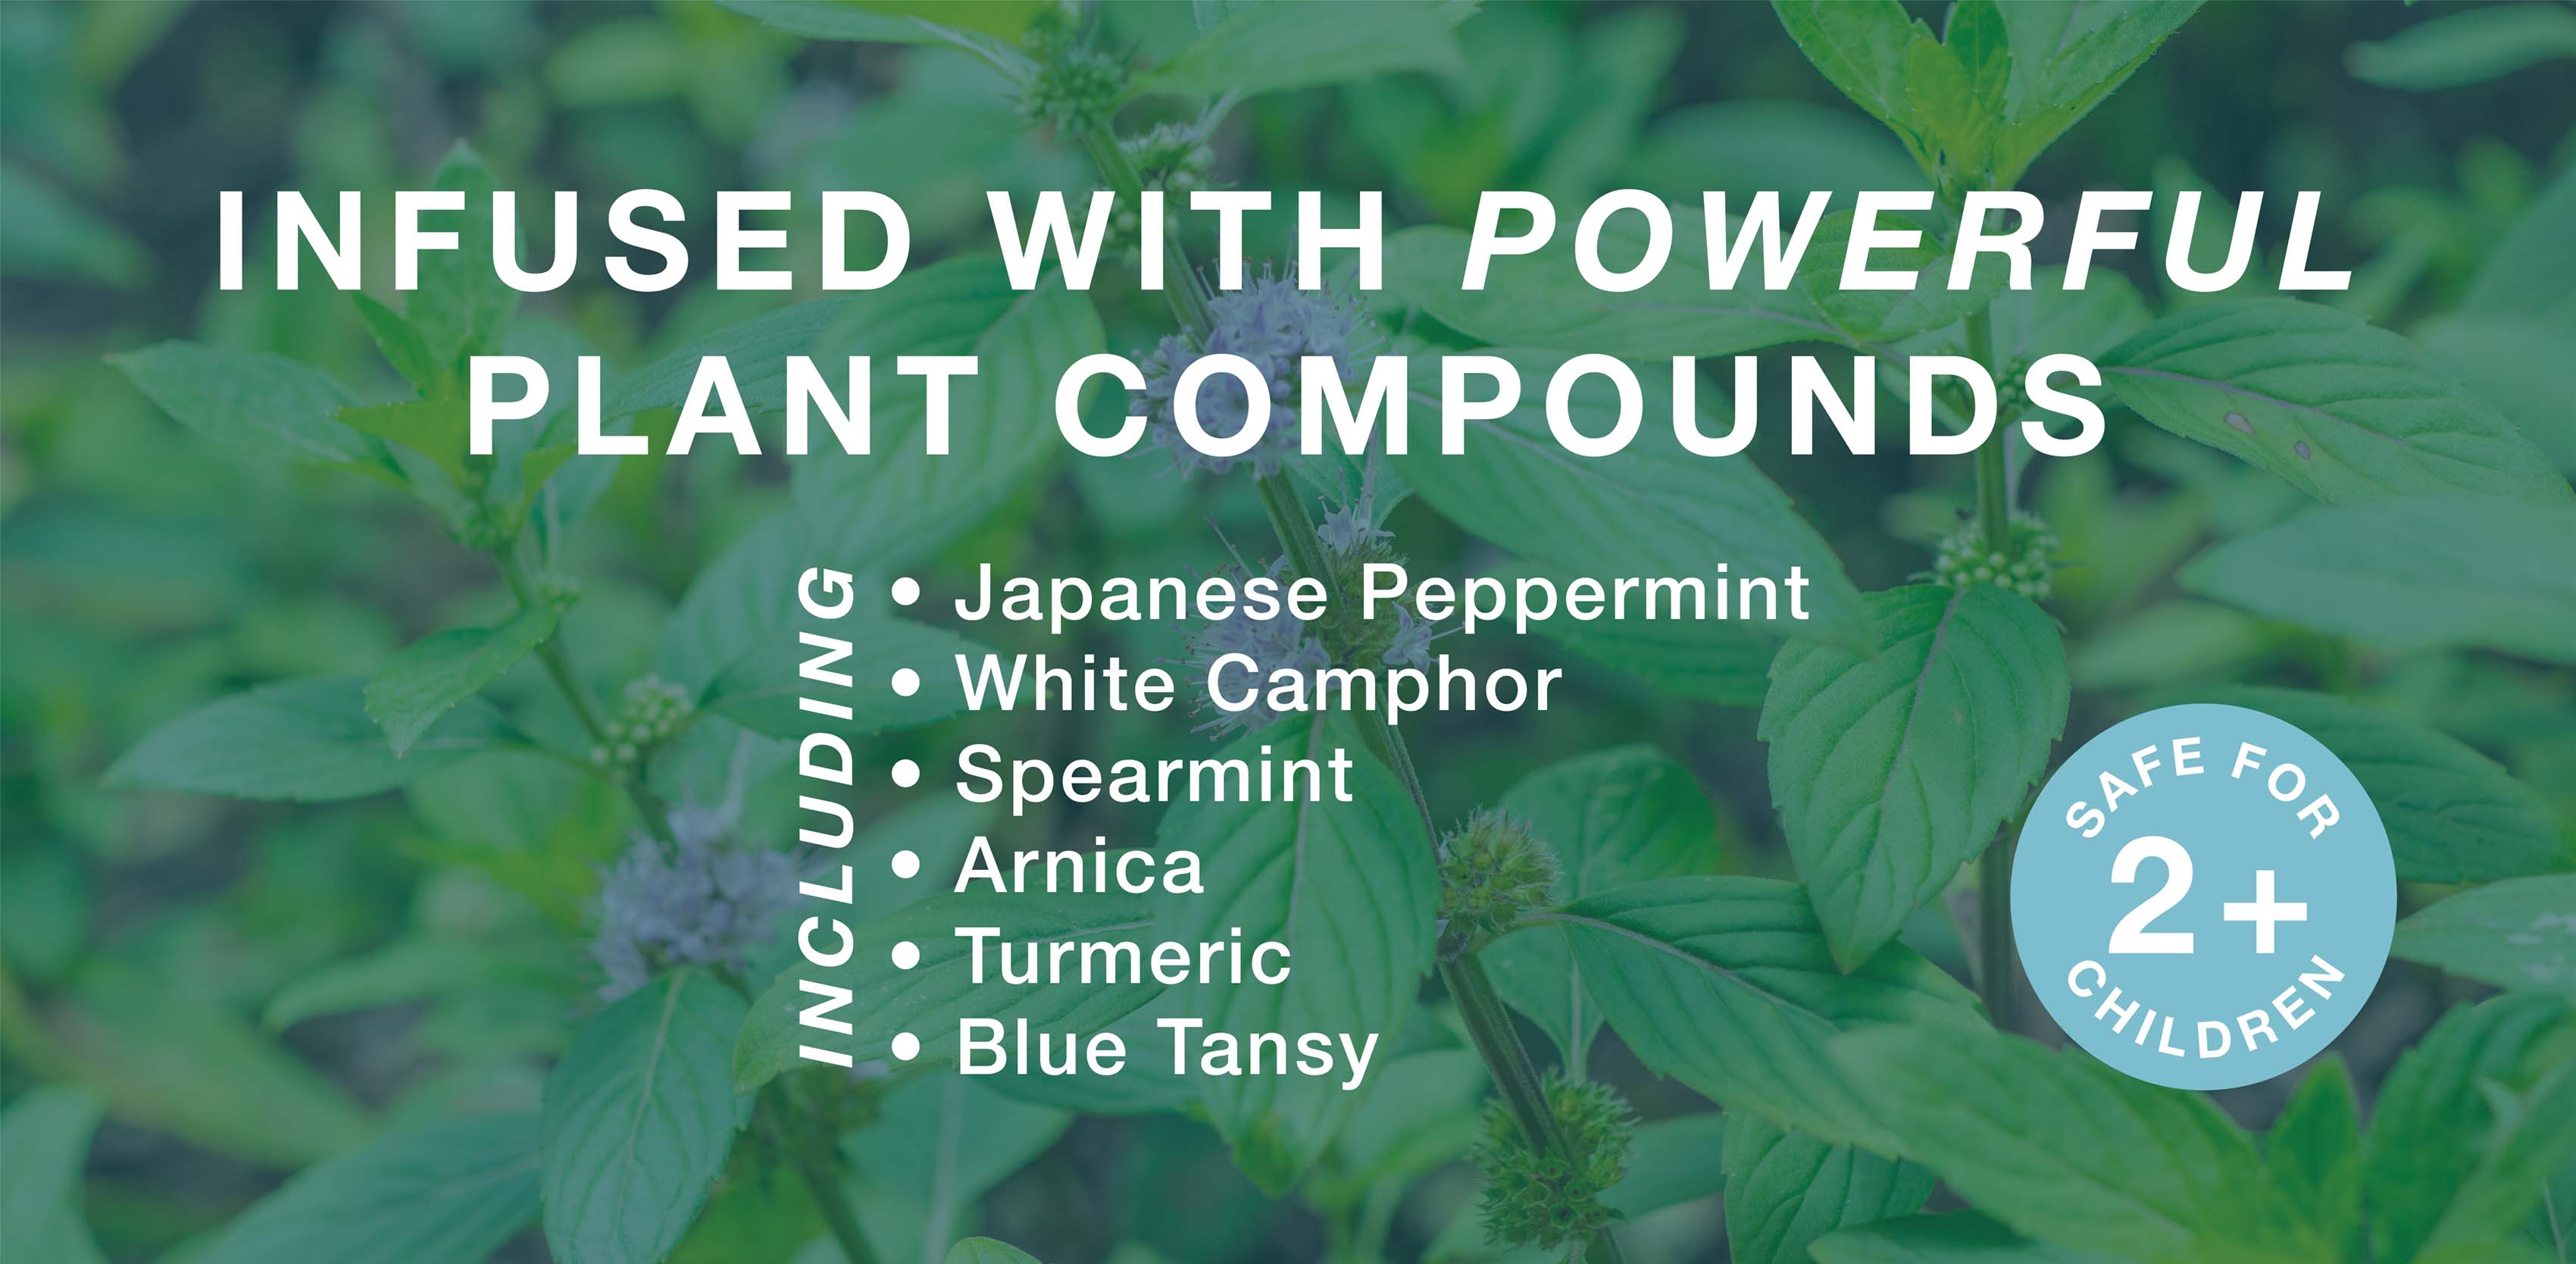 In fused with powerful plant compounds including Japanese peppermint, white camphor and spearmint.